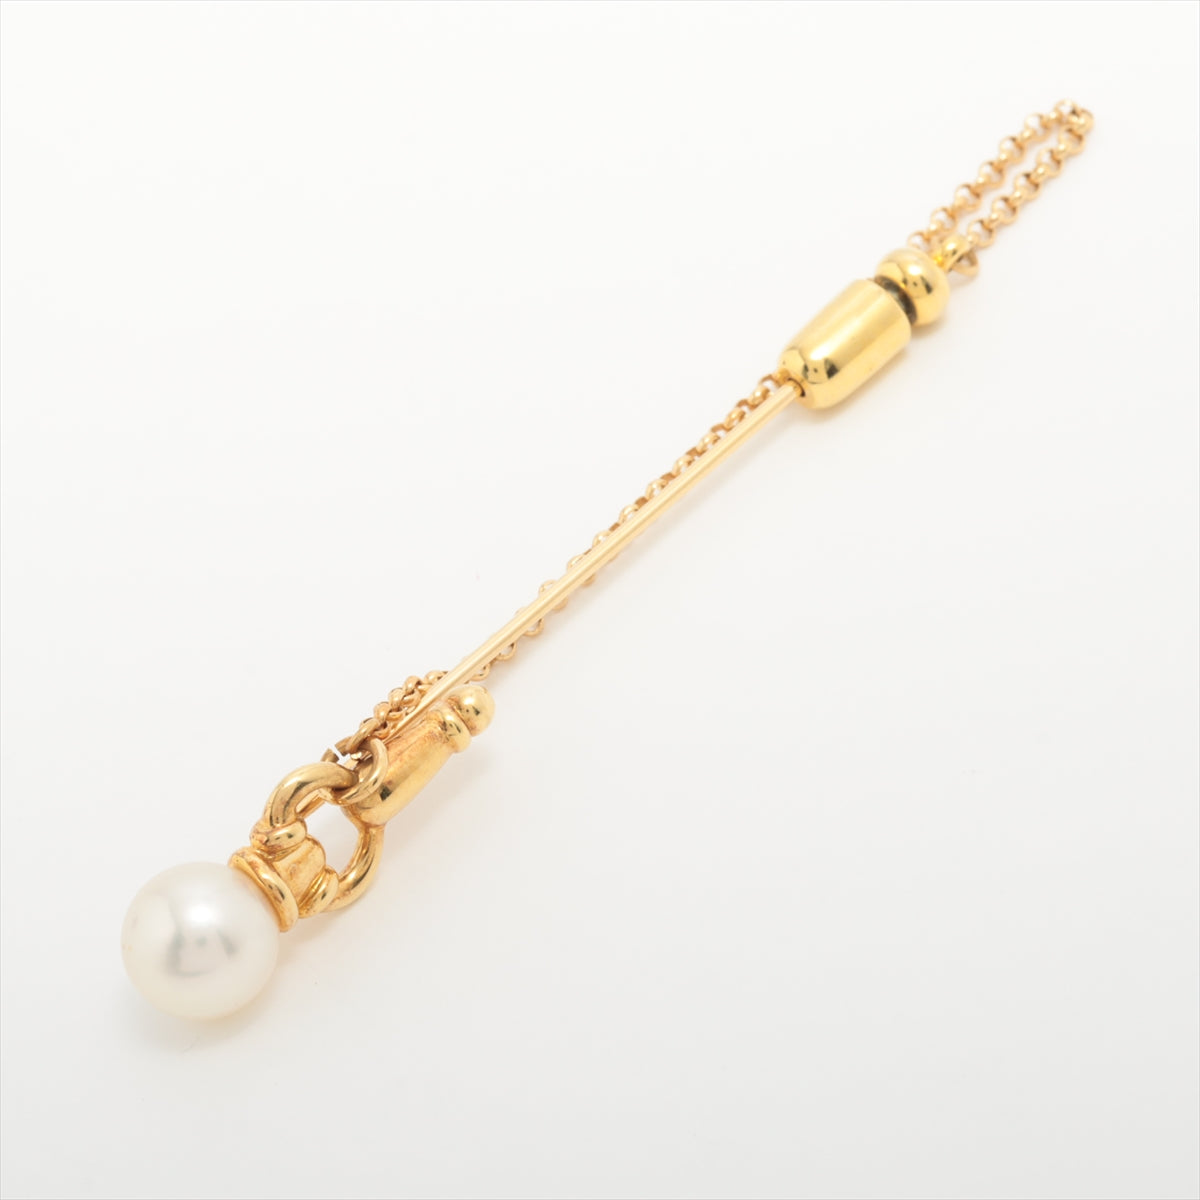 Mikimoto Pearl Tie pin K18(YG) 4.5g Approximately 8.0 mm in diameter